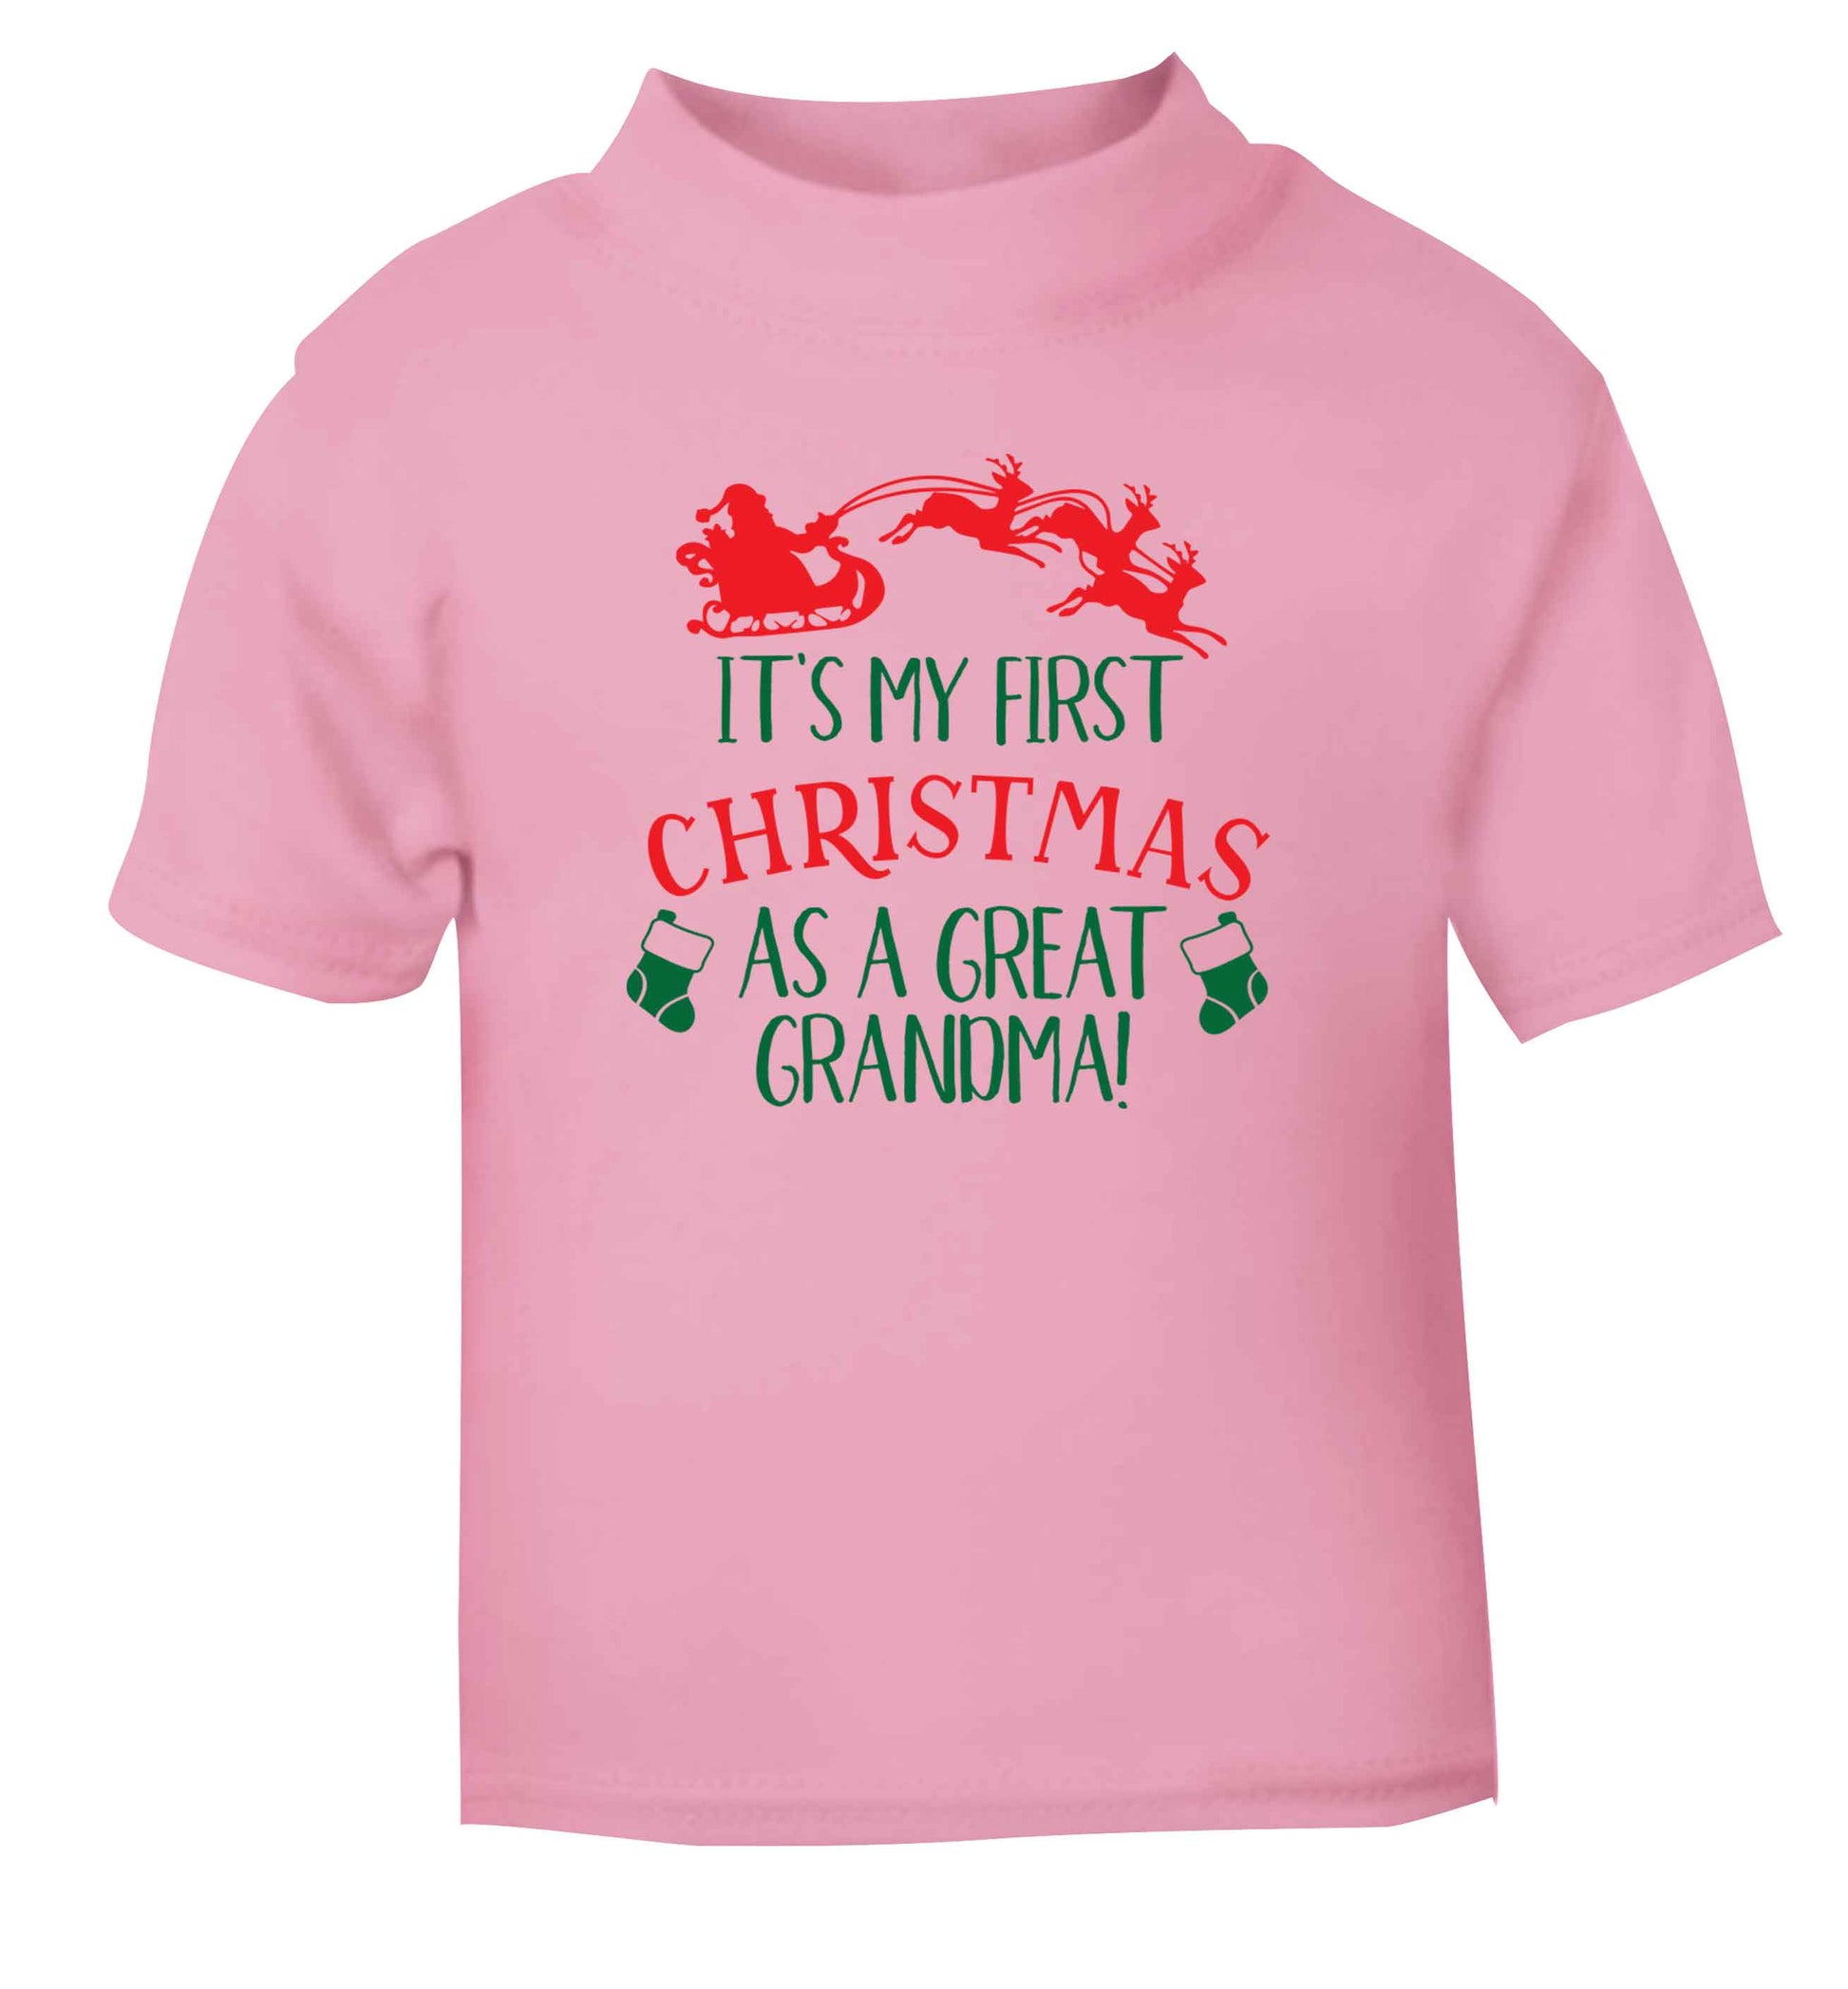 It's my first Christmas as a great grandma! light pink Baby Toddler Tshirt 2 Years